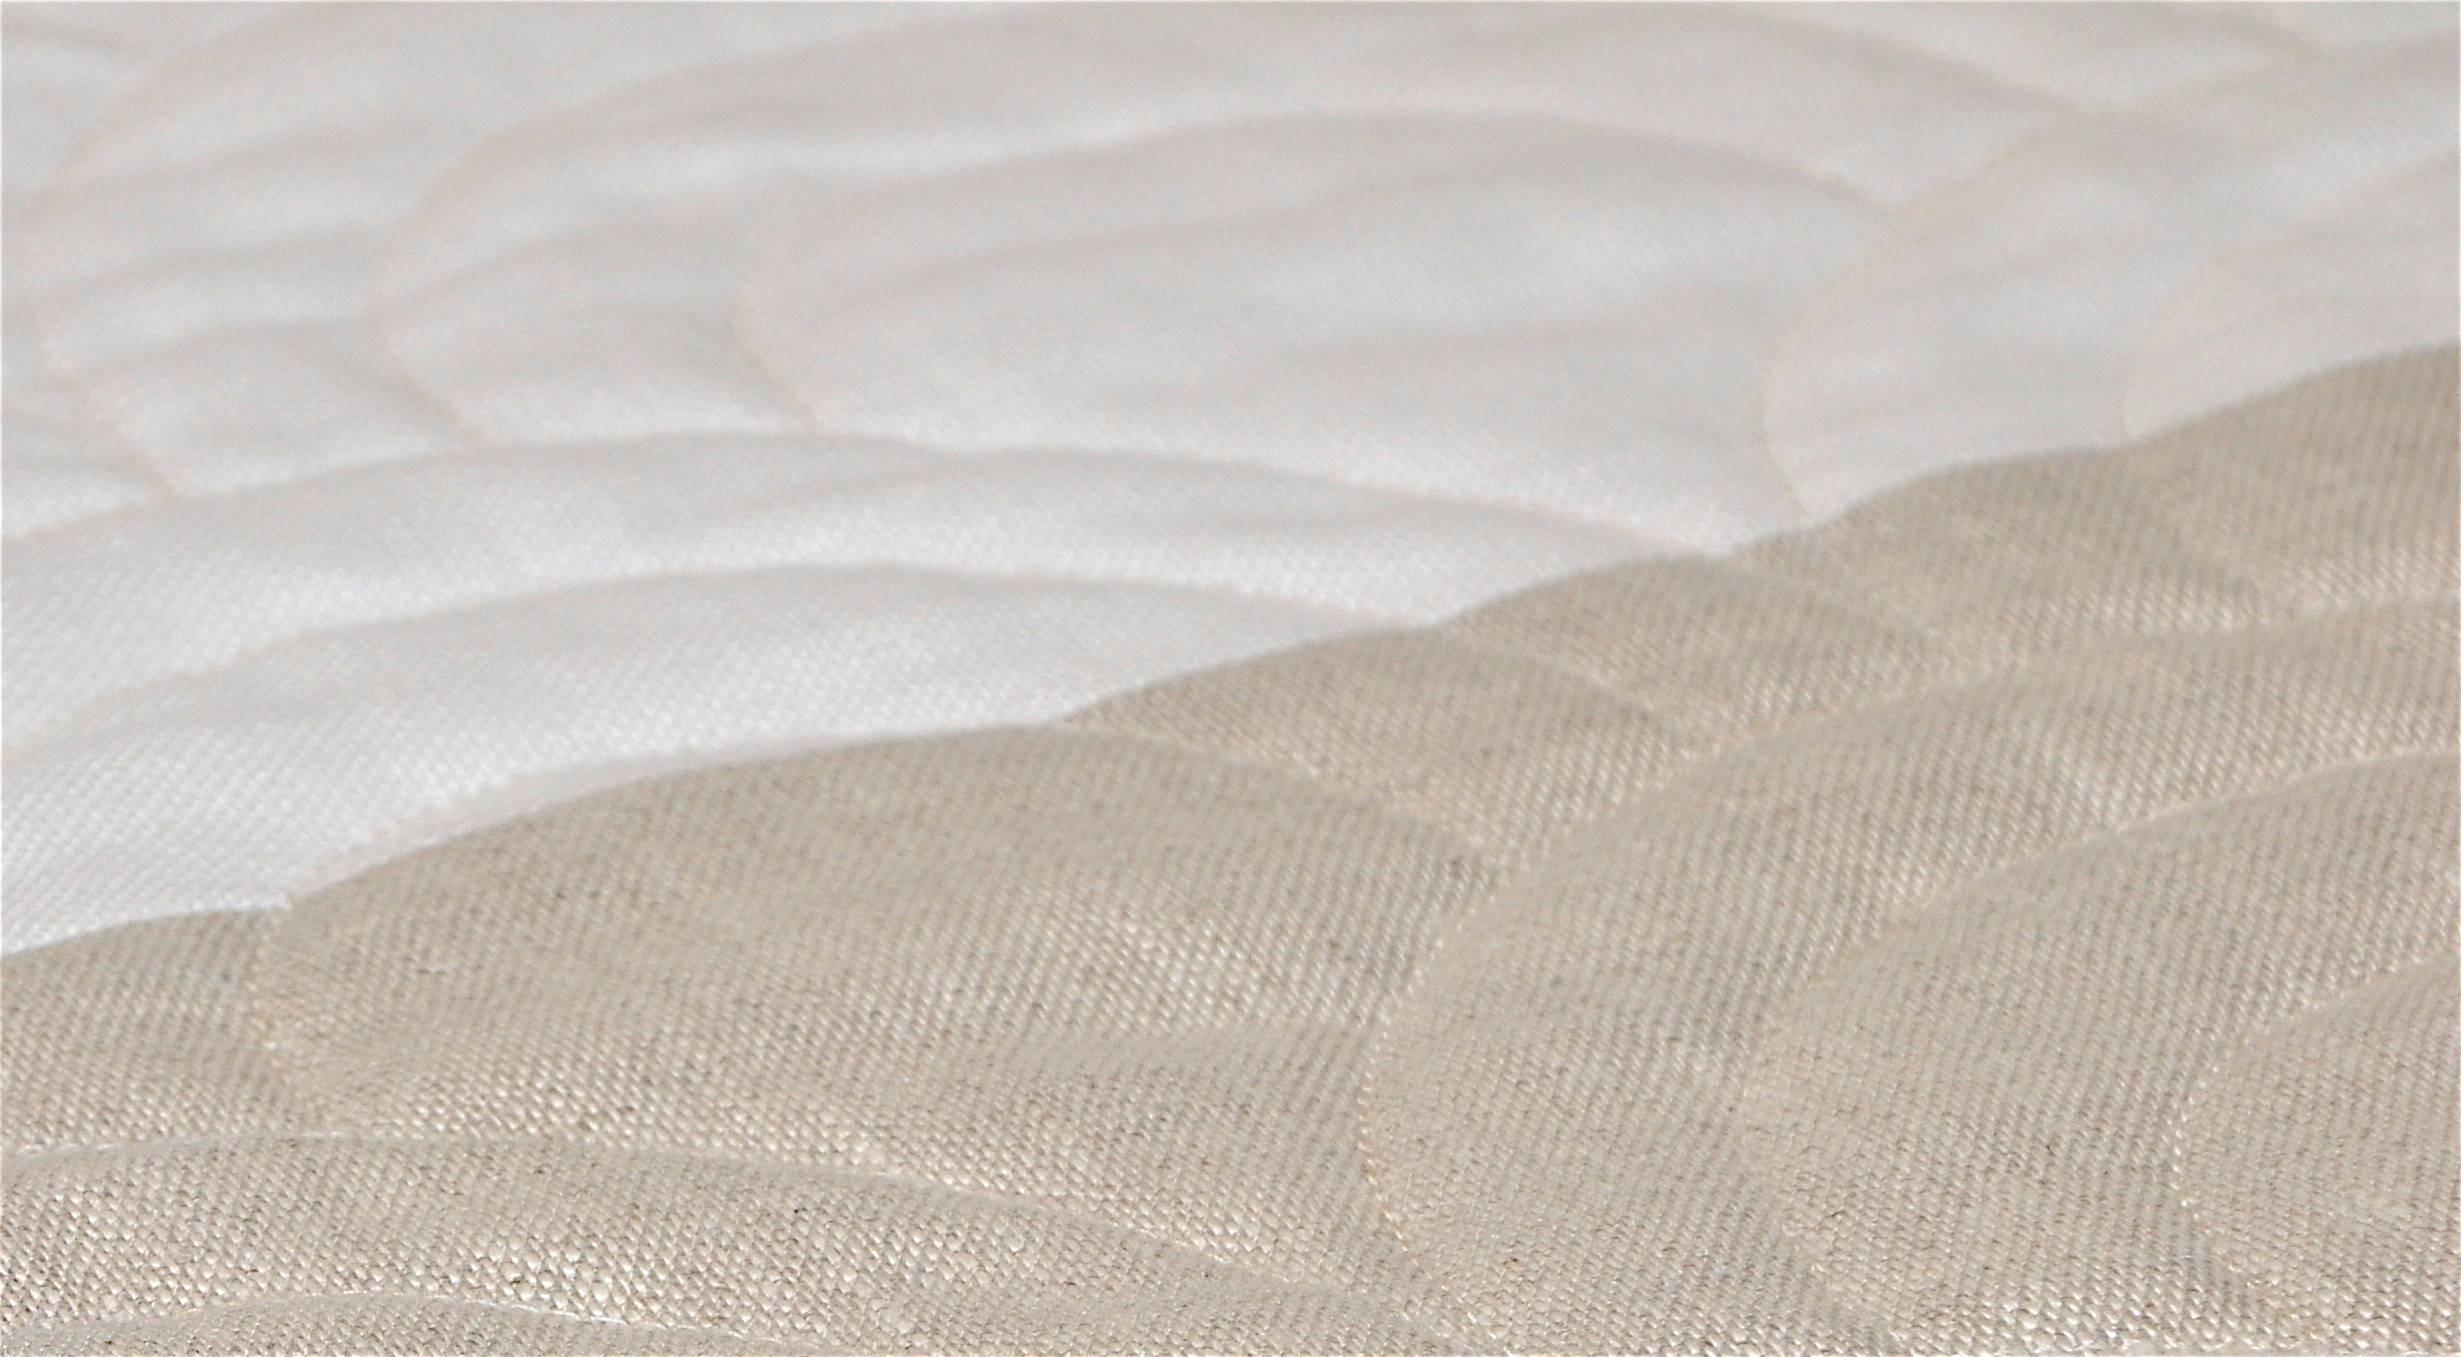 A custom-made luxury quilt constructed from 100% pure Irish linen in soft muted tones. 

Artisan made in Ireland by designer-maker Katie Larmour for KL Design Ireland Studio. 

Handcrafted in Ireland

Fits a small Queen bed or can be displayed